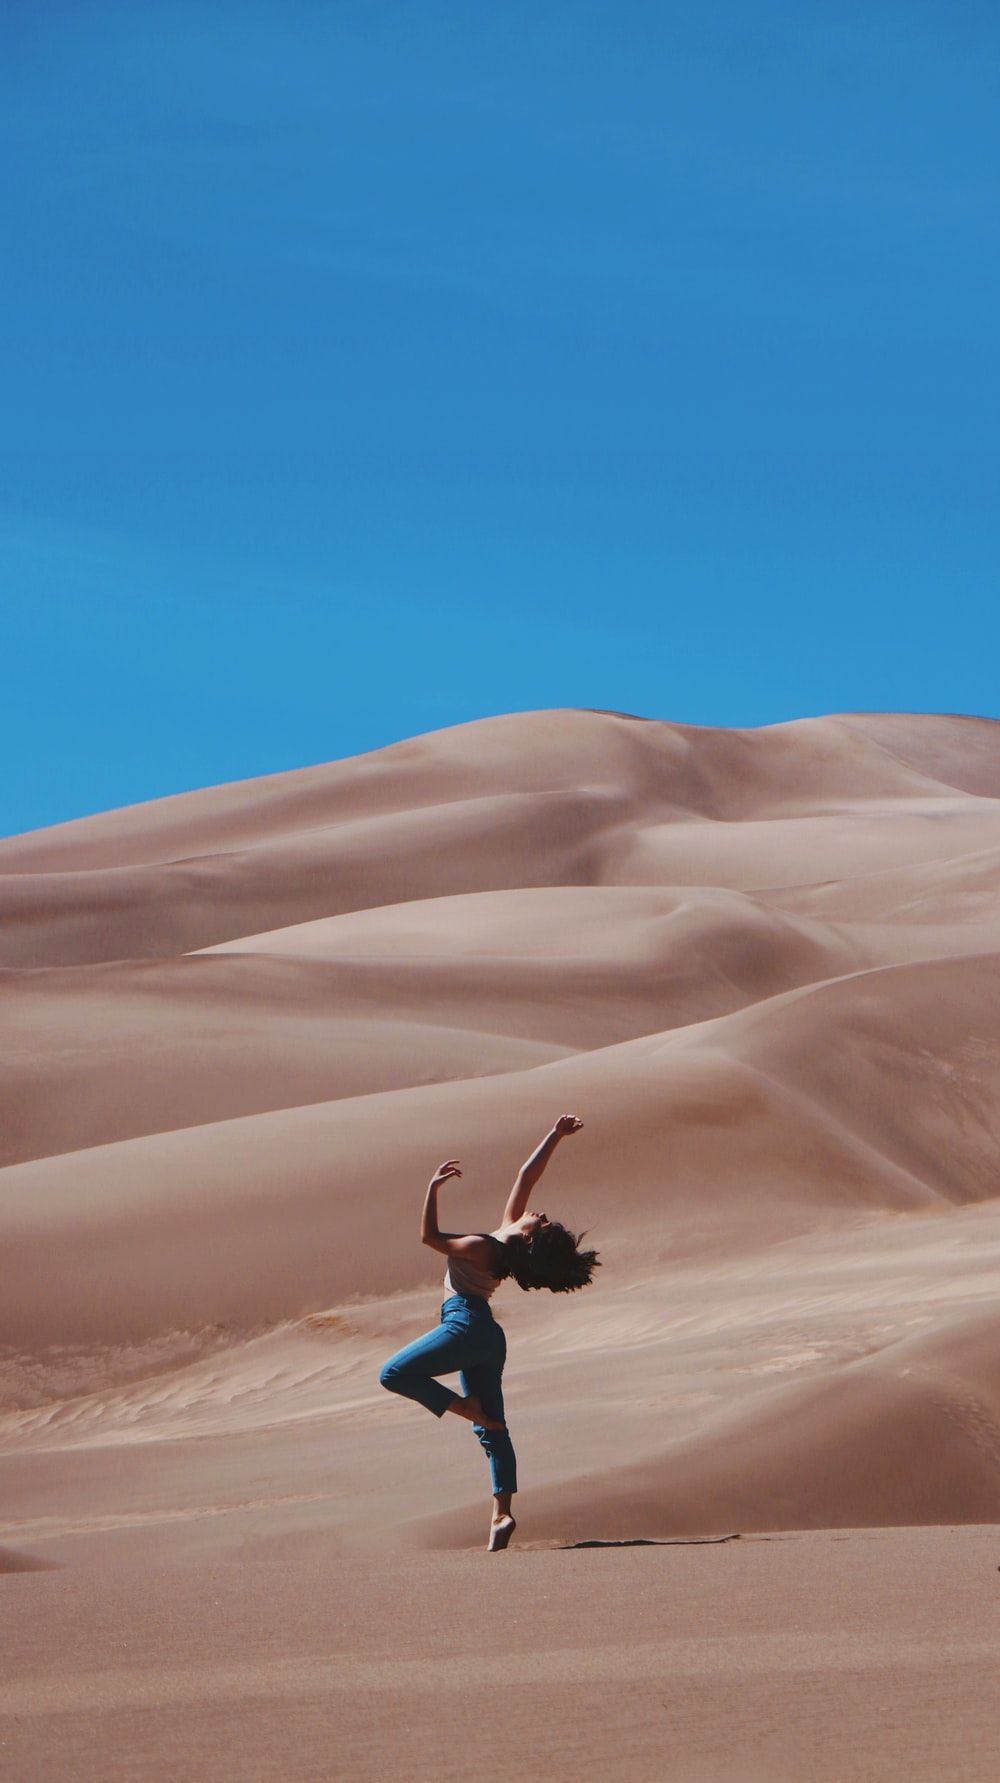 Desert Woman Picture. Download Free Image